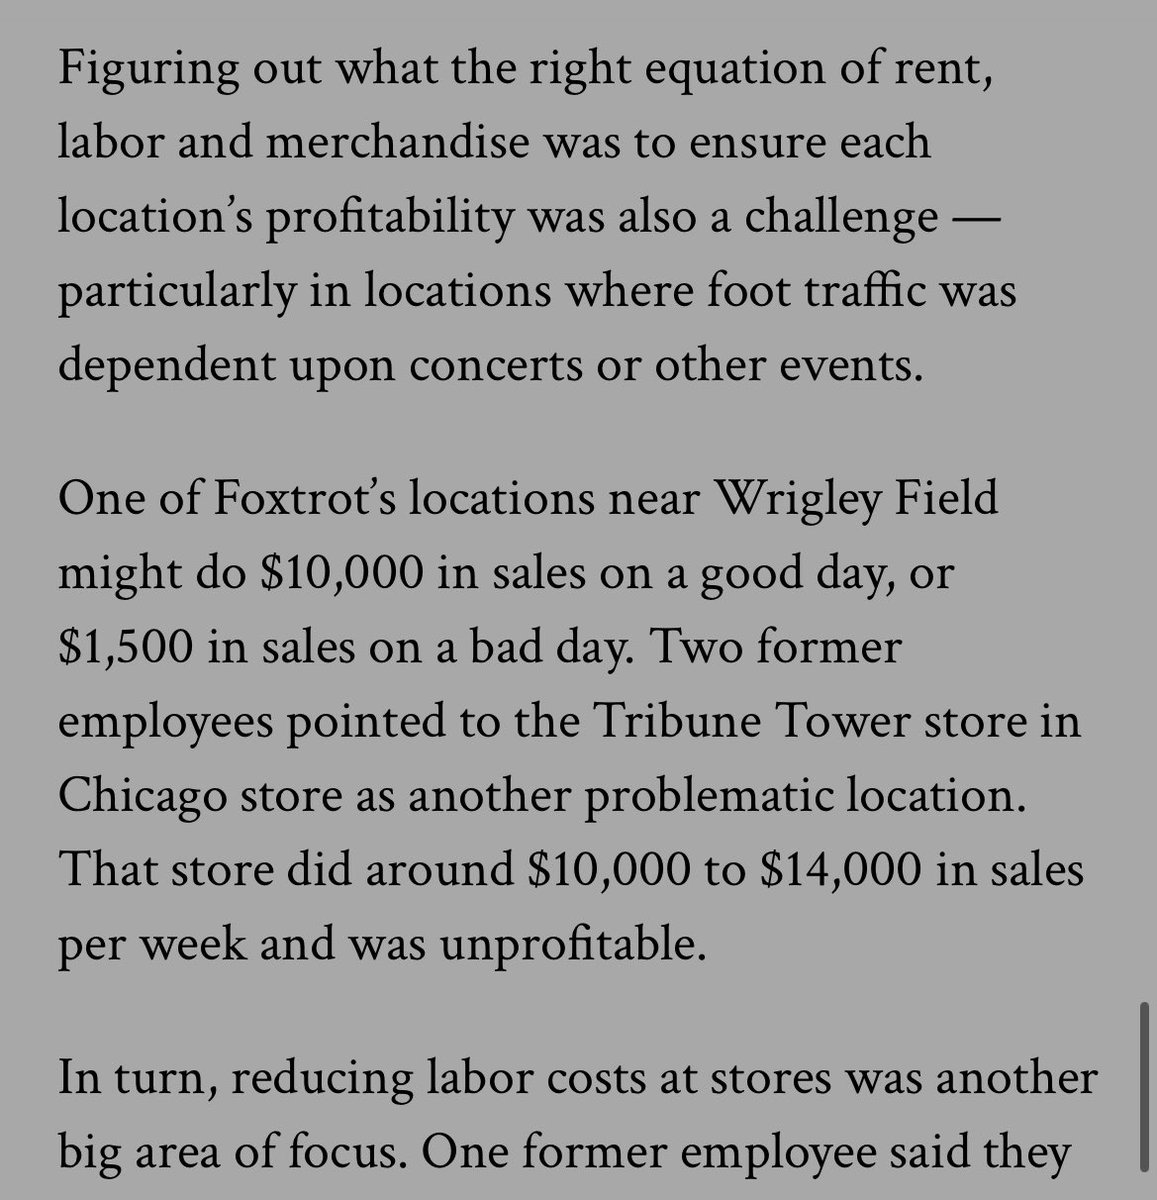 Still haven’t seen the Outfox/Foxtrot/Dom’s bankruptcy filing yet but this article I stumbled on seemed pretty informed. The nugget about the Wrigley Field Foxtrot performance’s “surprise” is hilarious btw. modernretail.co/operations/wha…